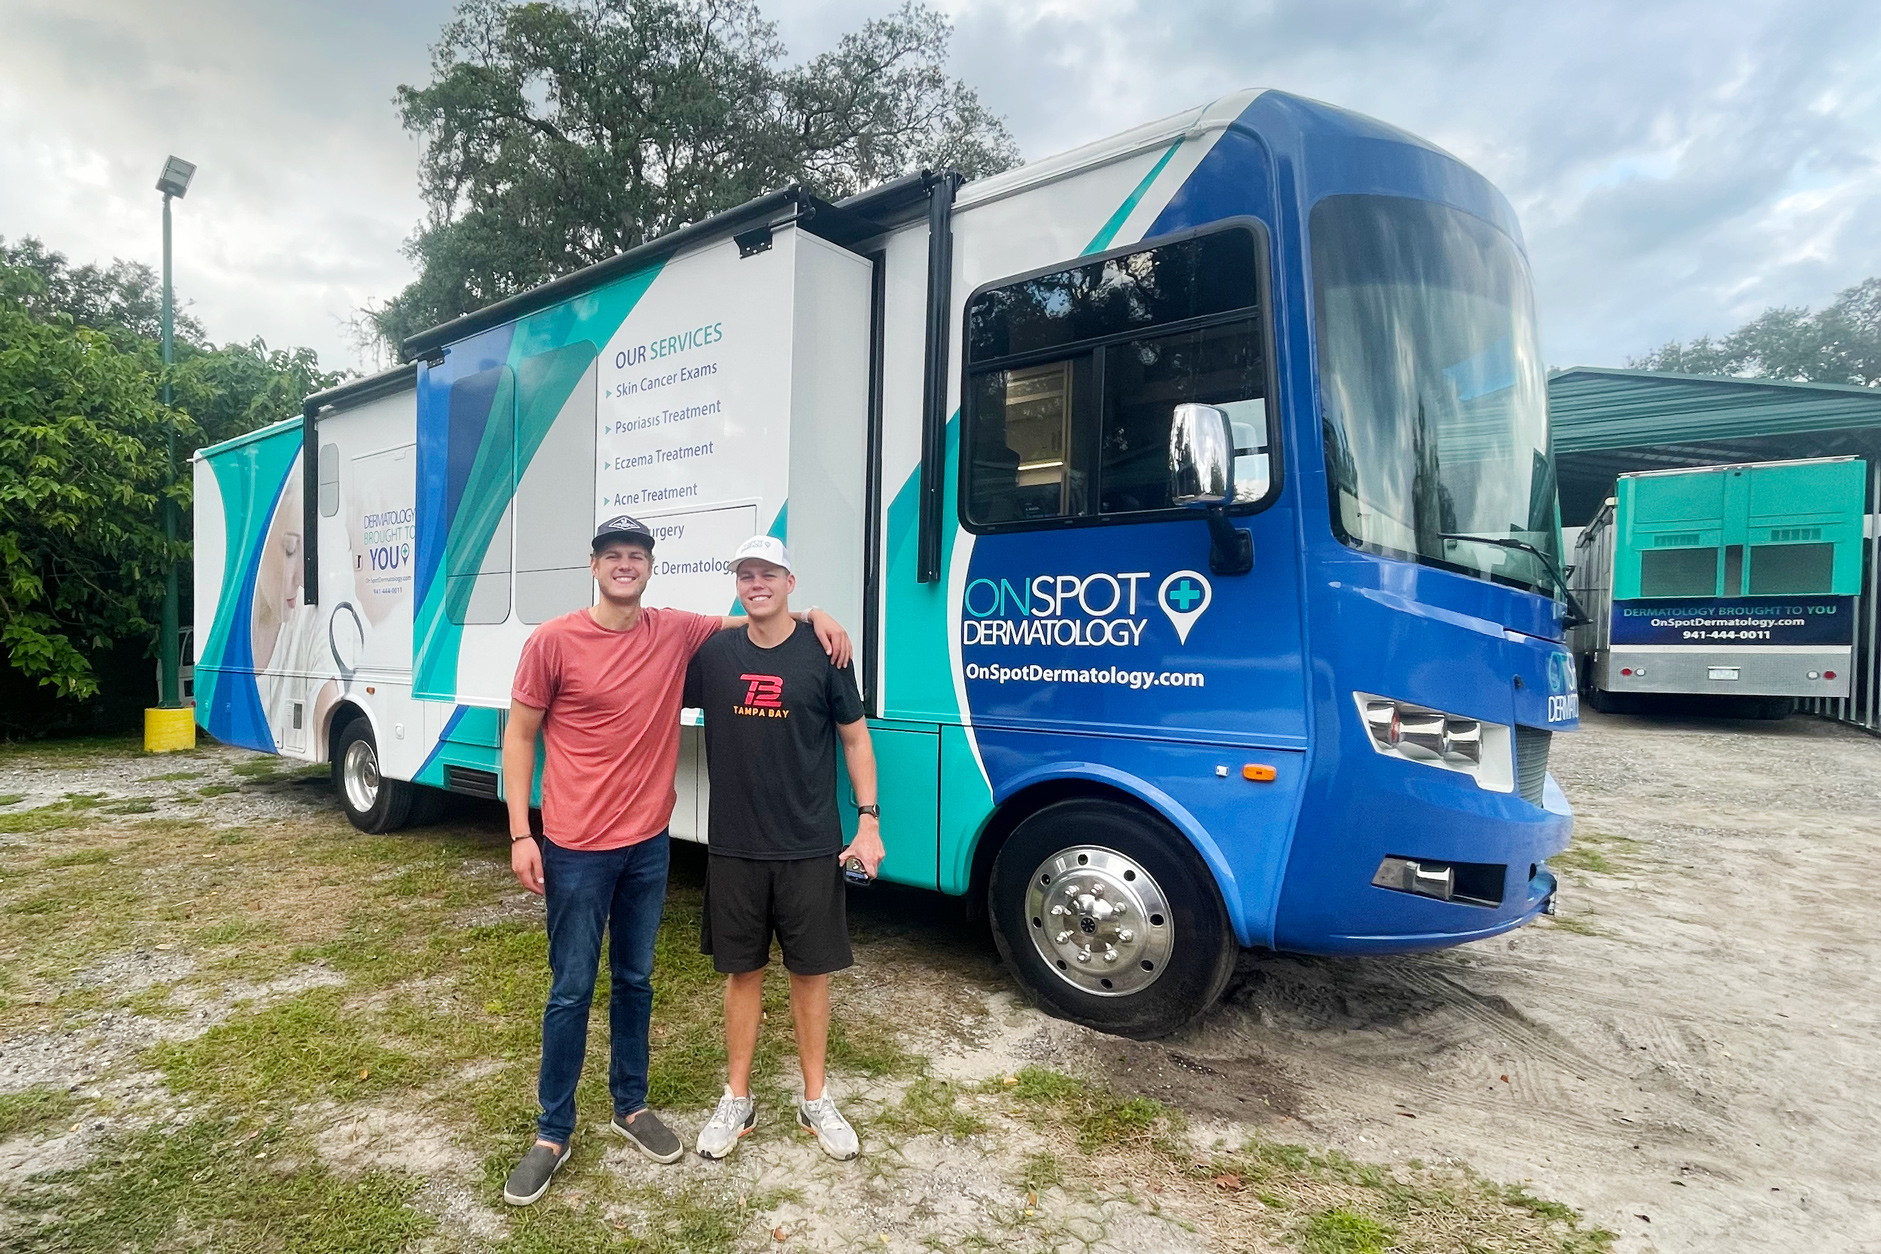 Brothers Darin, left, and Don Hunt, right,  pose for a photo in front of a blue and teal mobile dermatology clinic parked on a grassy lot in Florida.